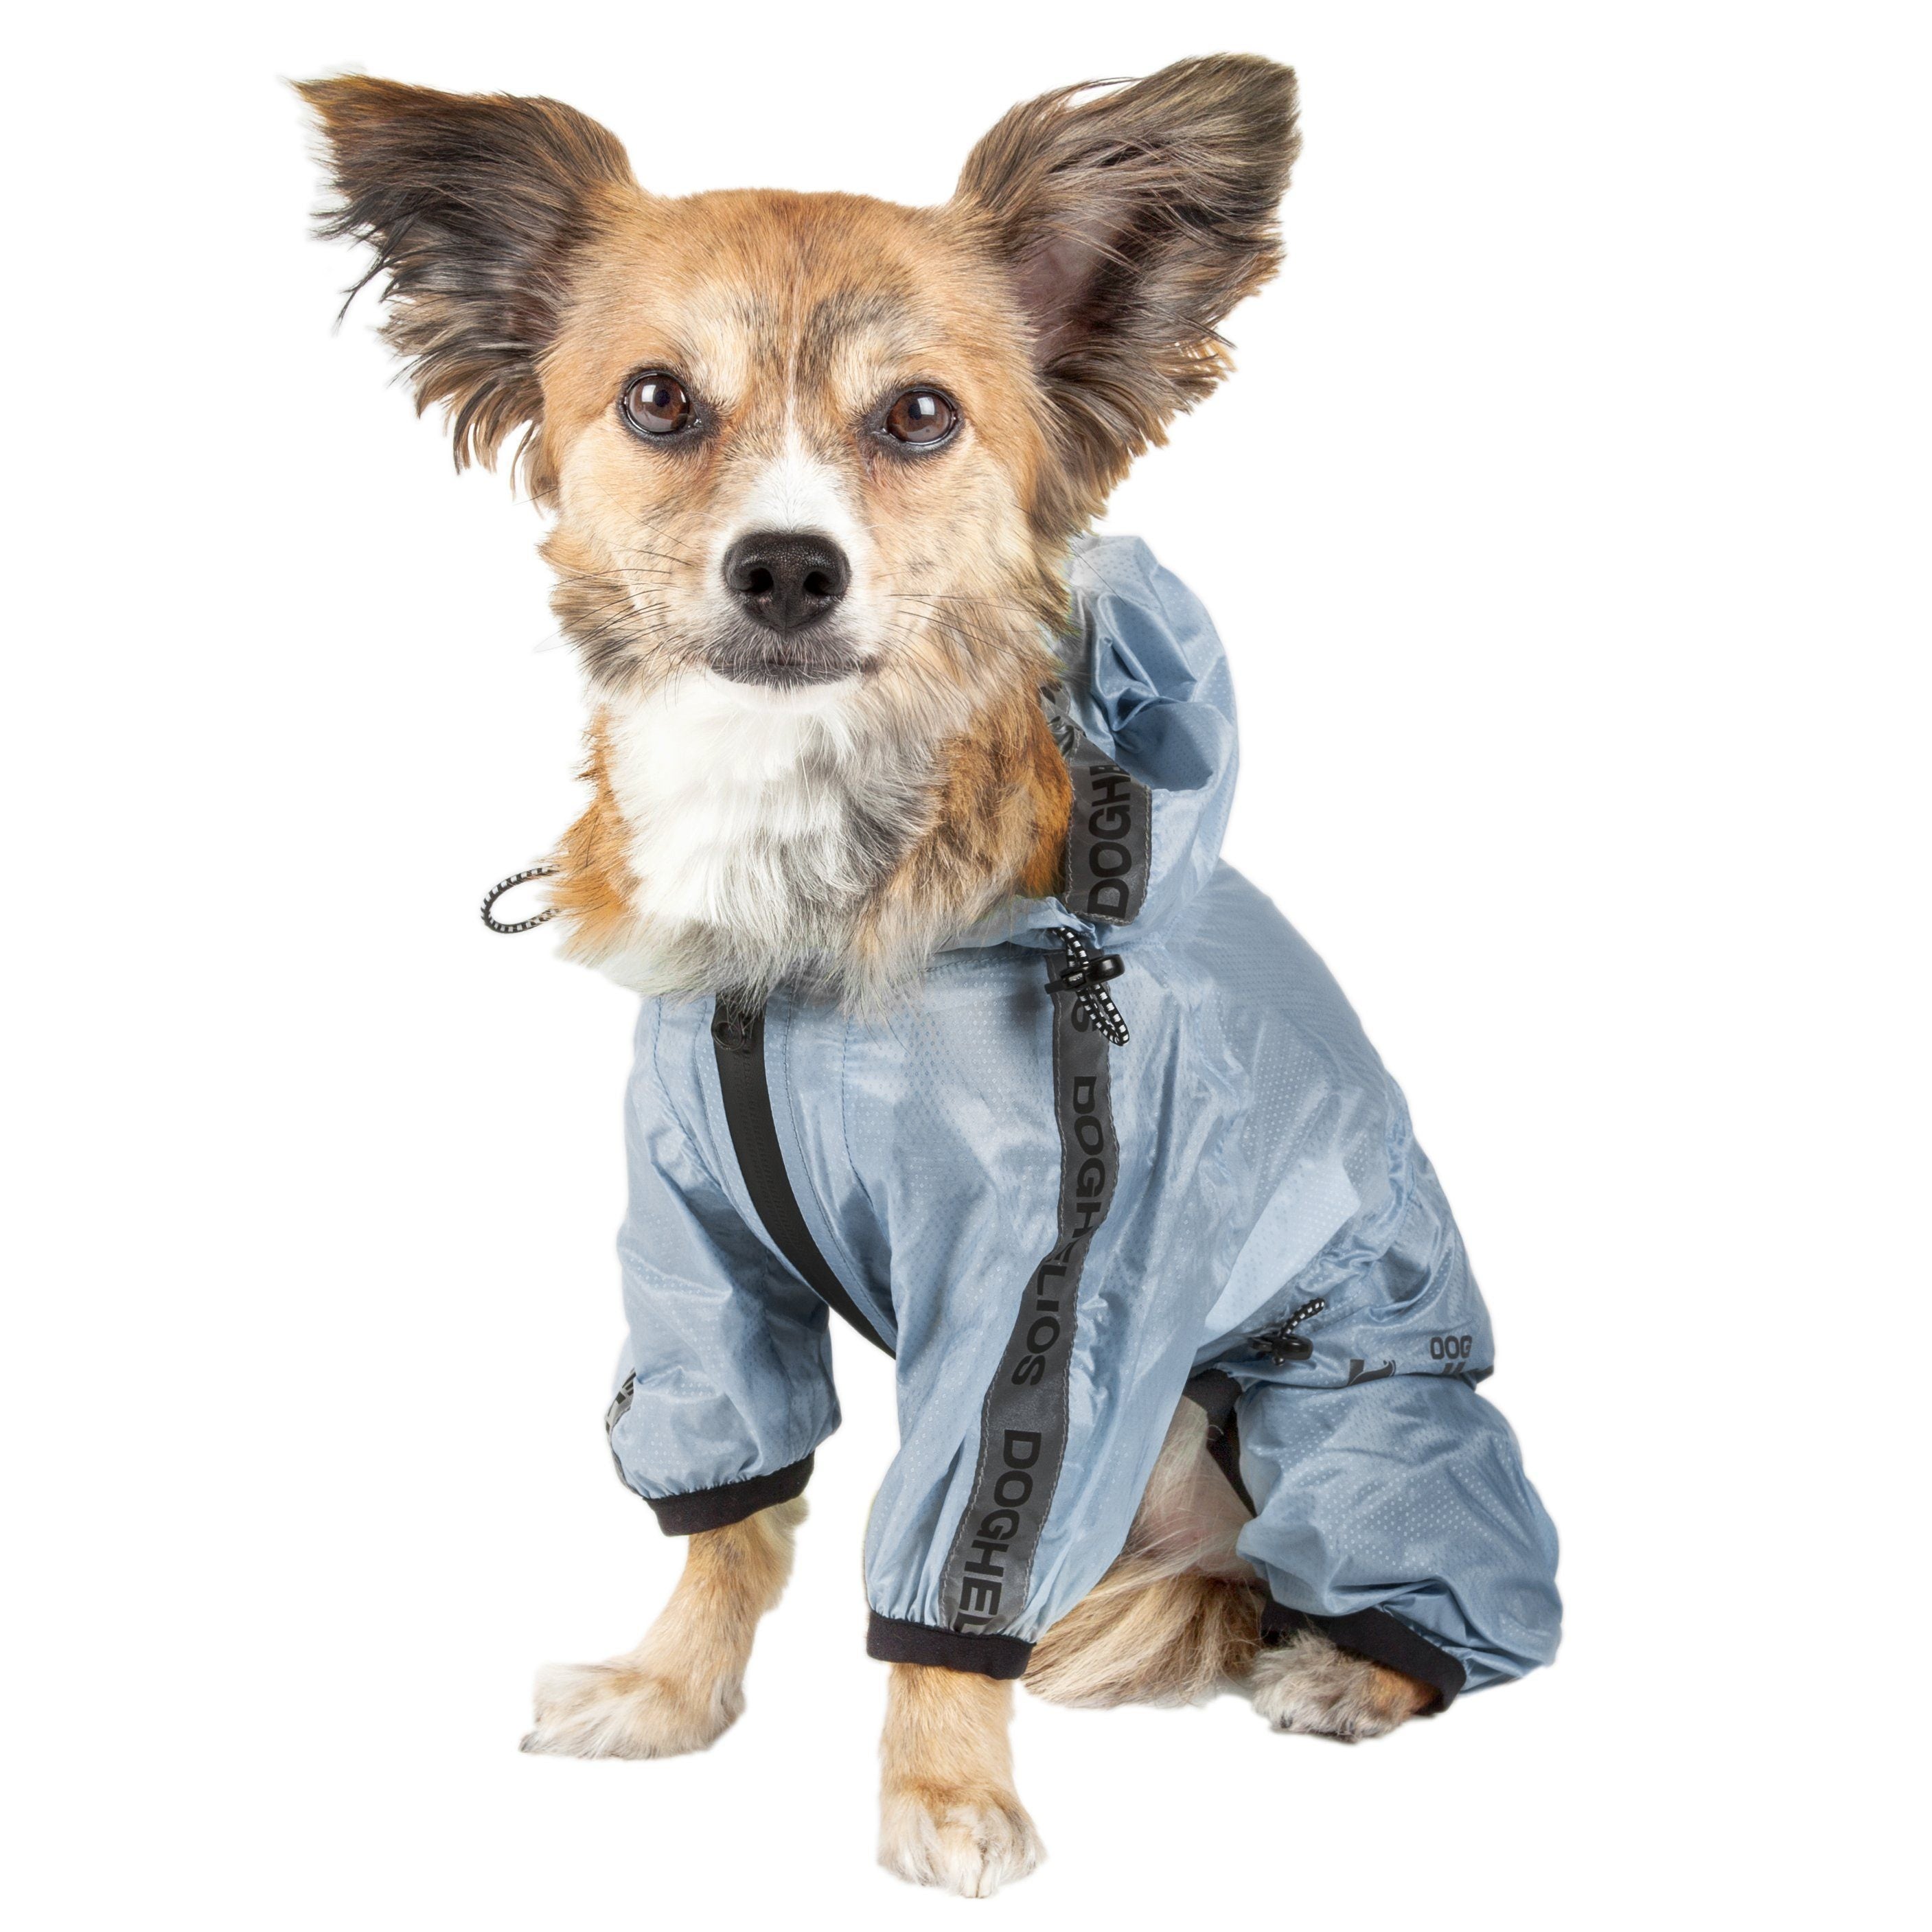 Dog Helios ® 'Torrential Shield' Waterproof and Adjustable Full Body Dog Raincoat X-Small Royal Blue